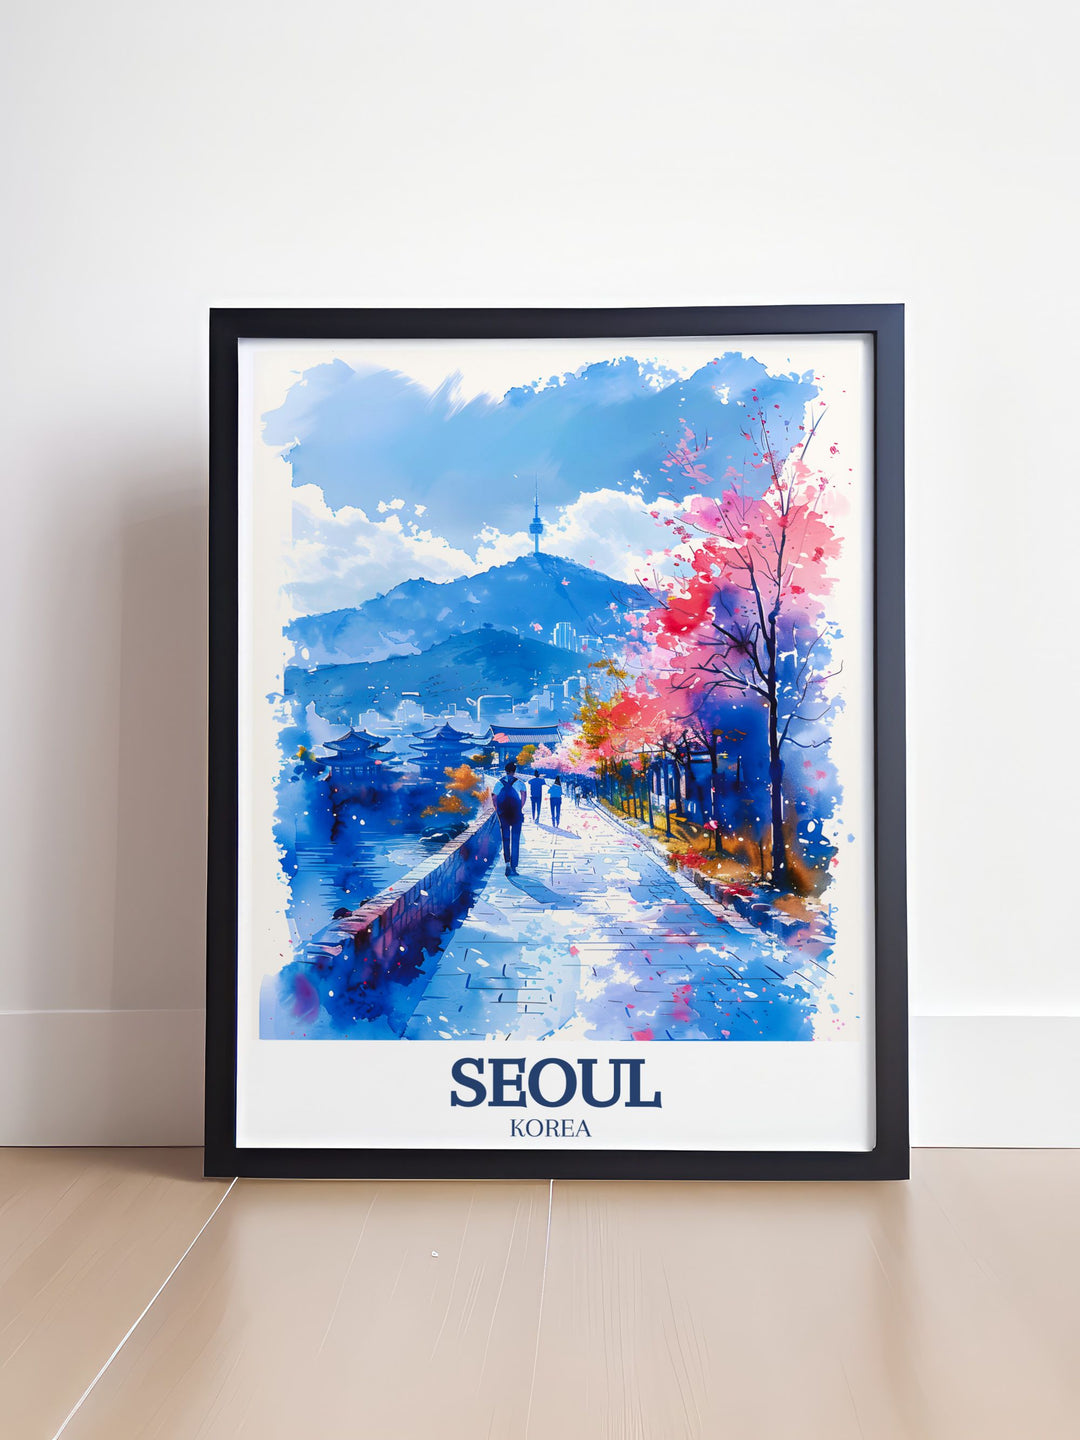 Vivid Seoul Photo of N Seoul Tower and Bukchon Hanok Village ideal for home decor or as a traveler gift showcasing the beauty and cultural heritage of South Korea a great addition to any wall